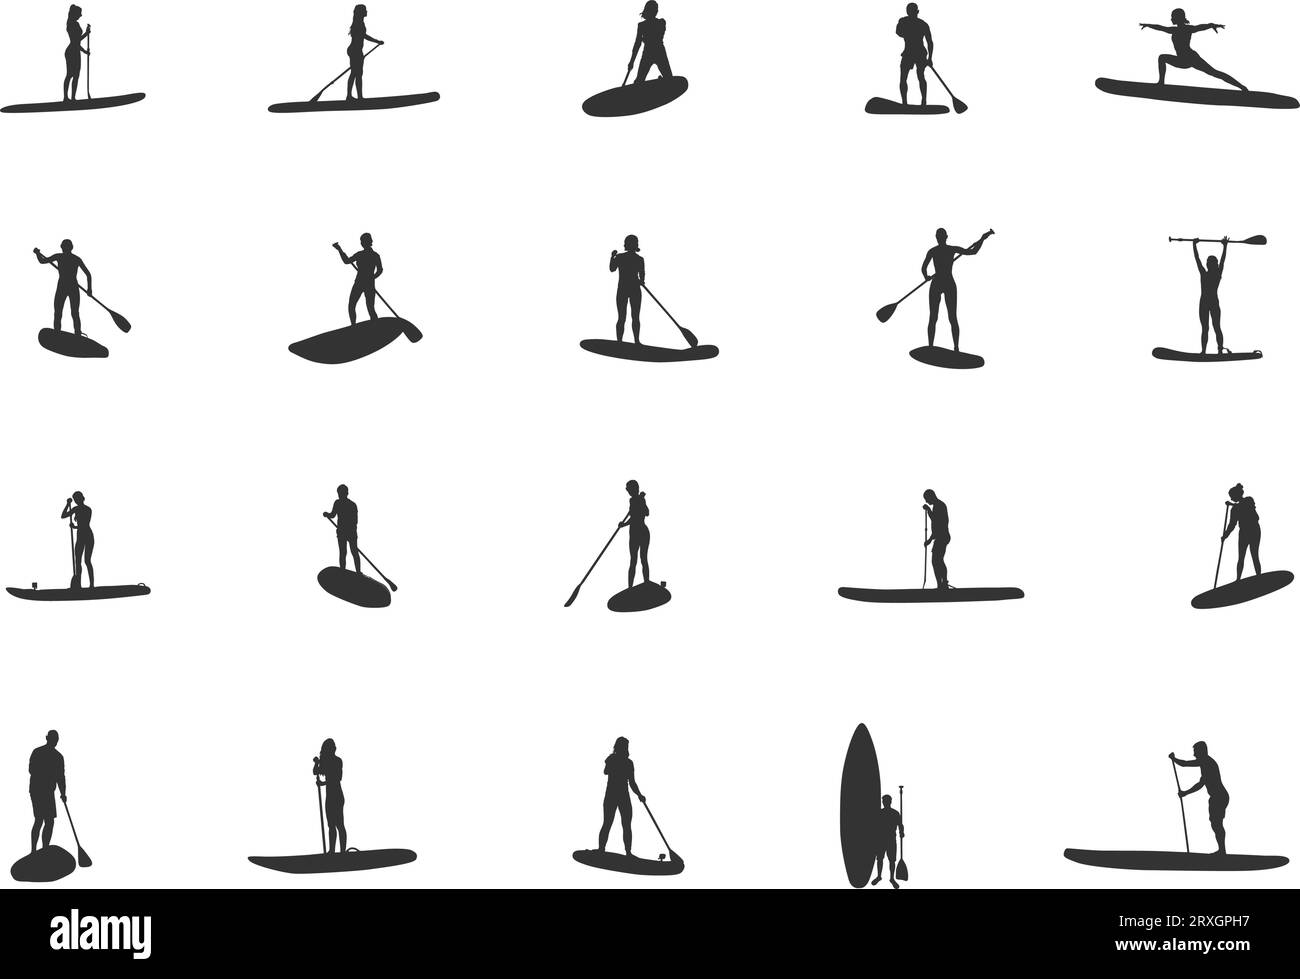 Paddleboarding silhouettes, Woman paddleboard silhouette, Paddleboard silhouette, Standup paddleboarding, Paddleboard svg, Paddleboard vector, Paddle Stock Vector